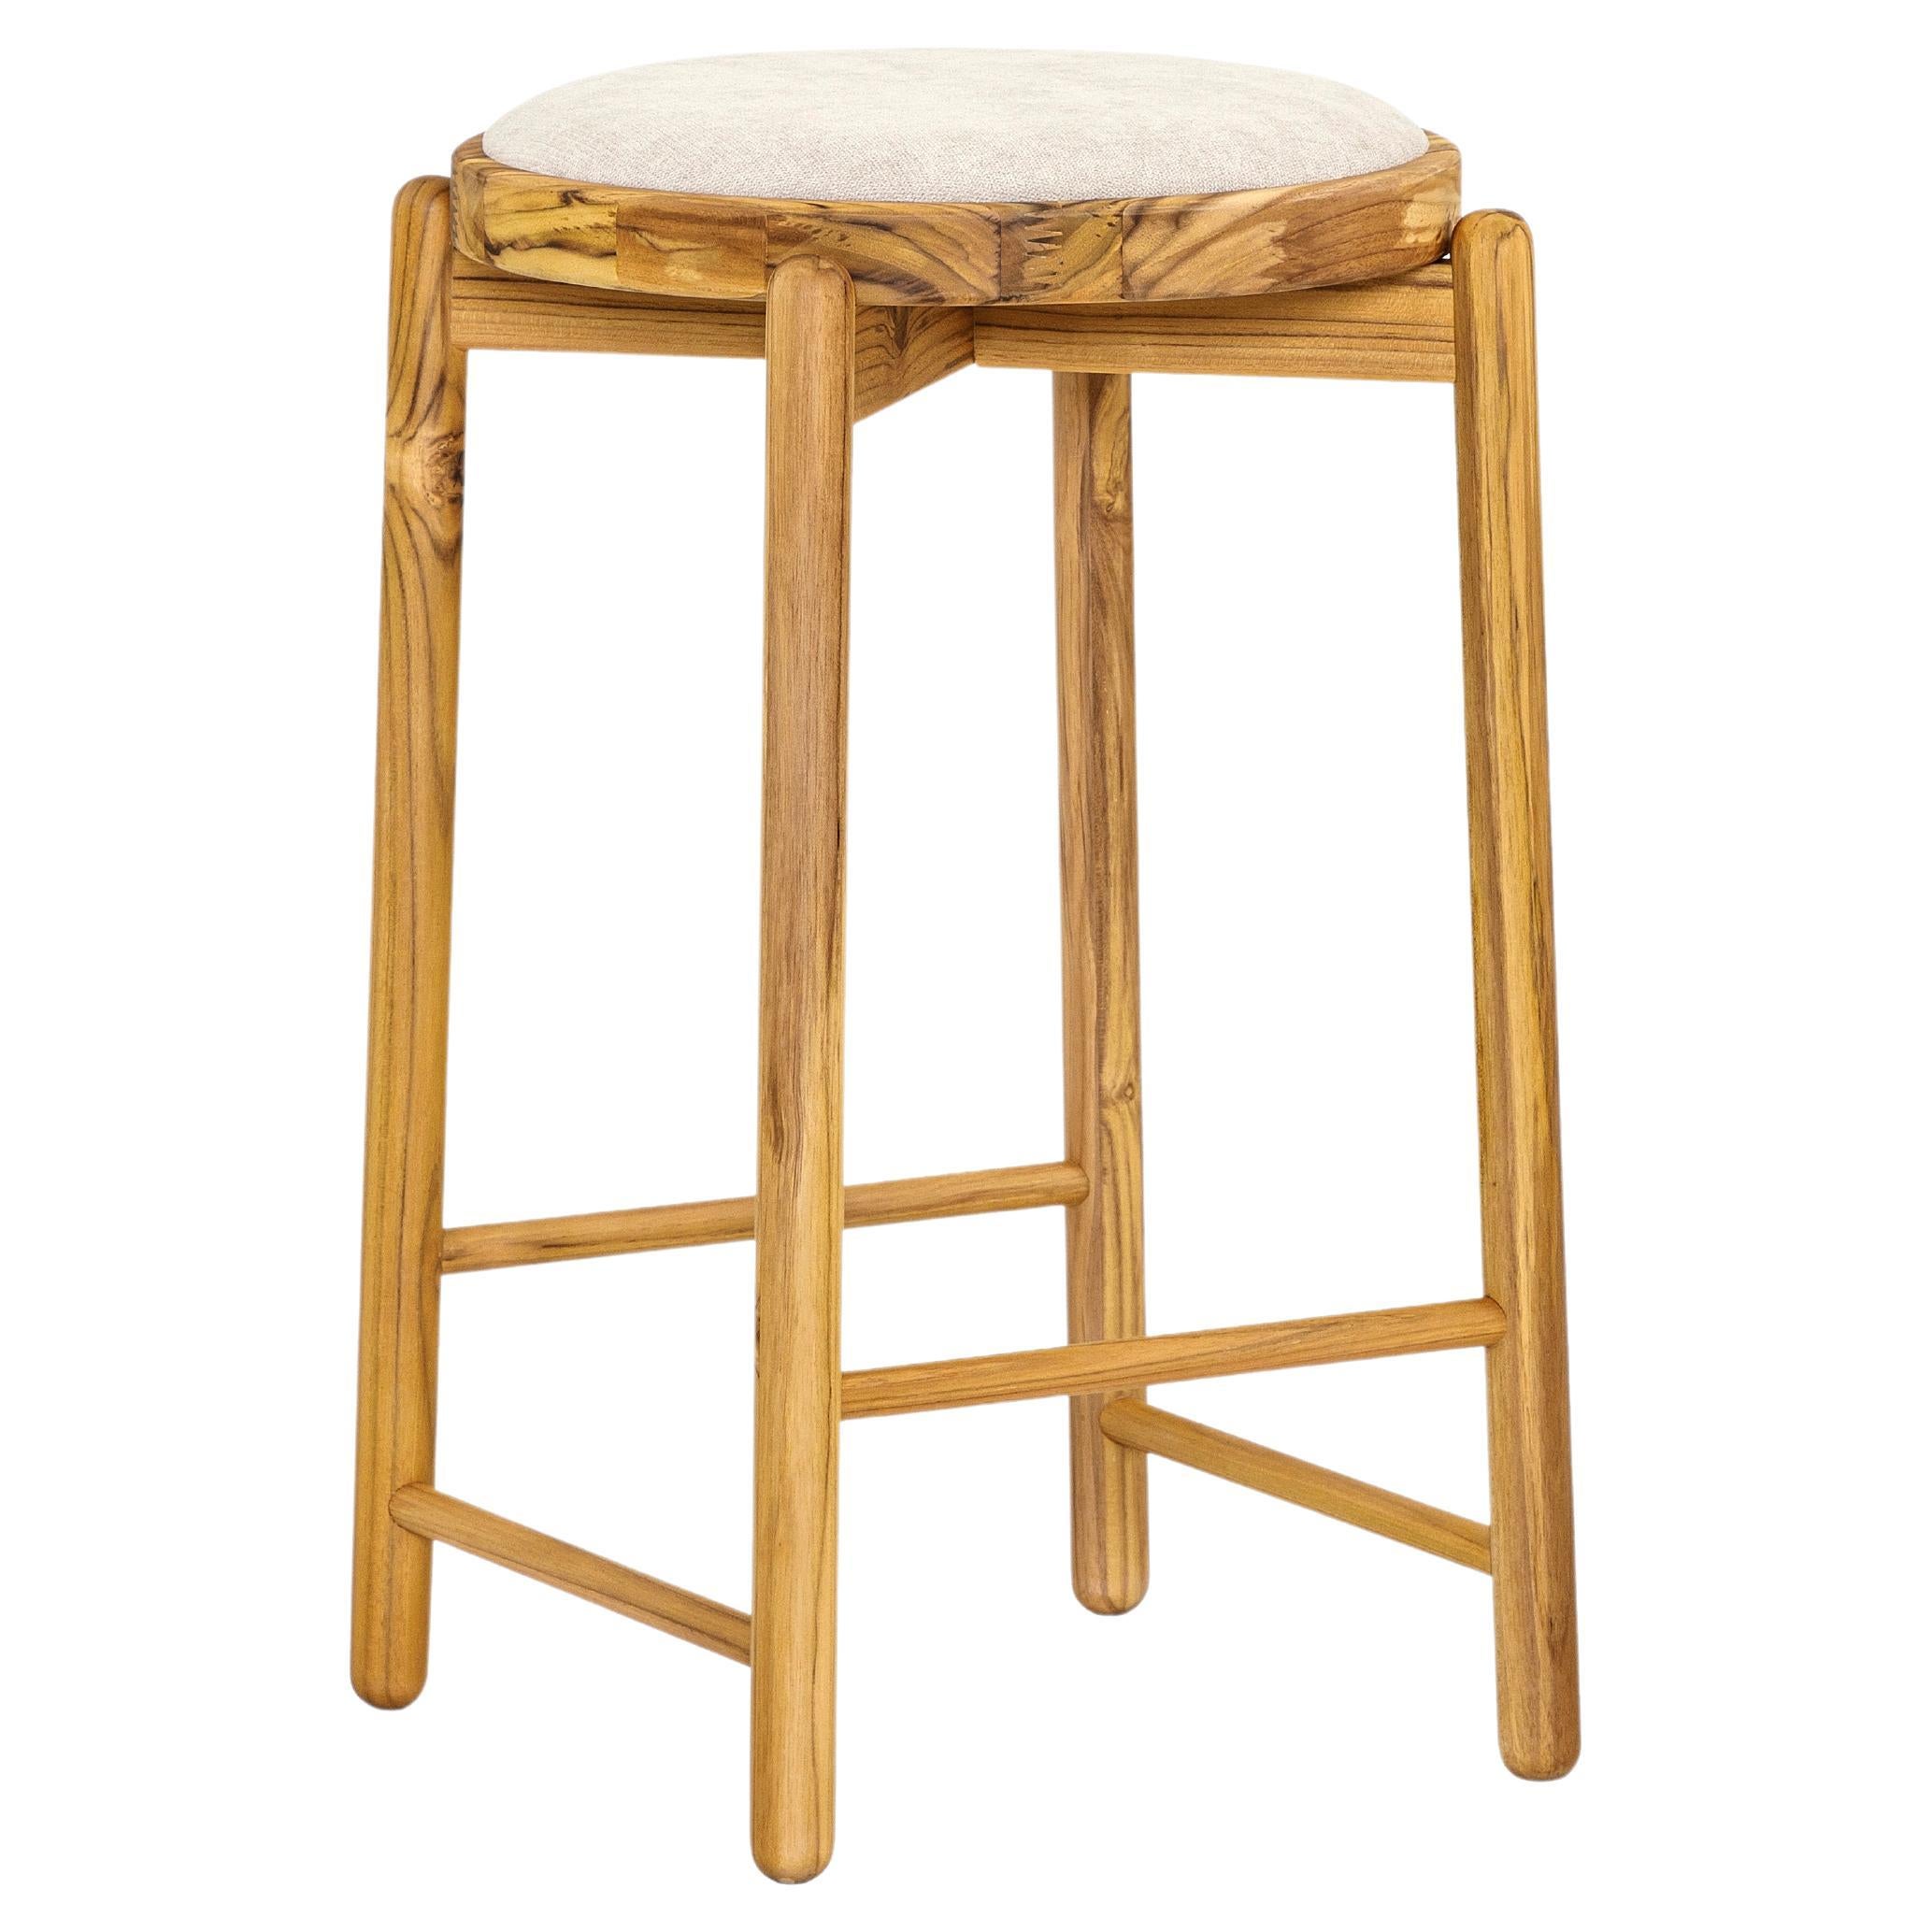 Maru Counter Stool in Teak Wood Base and Upholstered Light Beige Seat